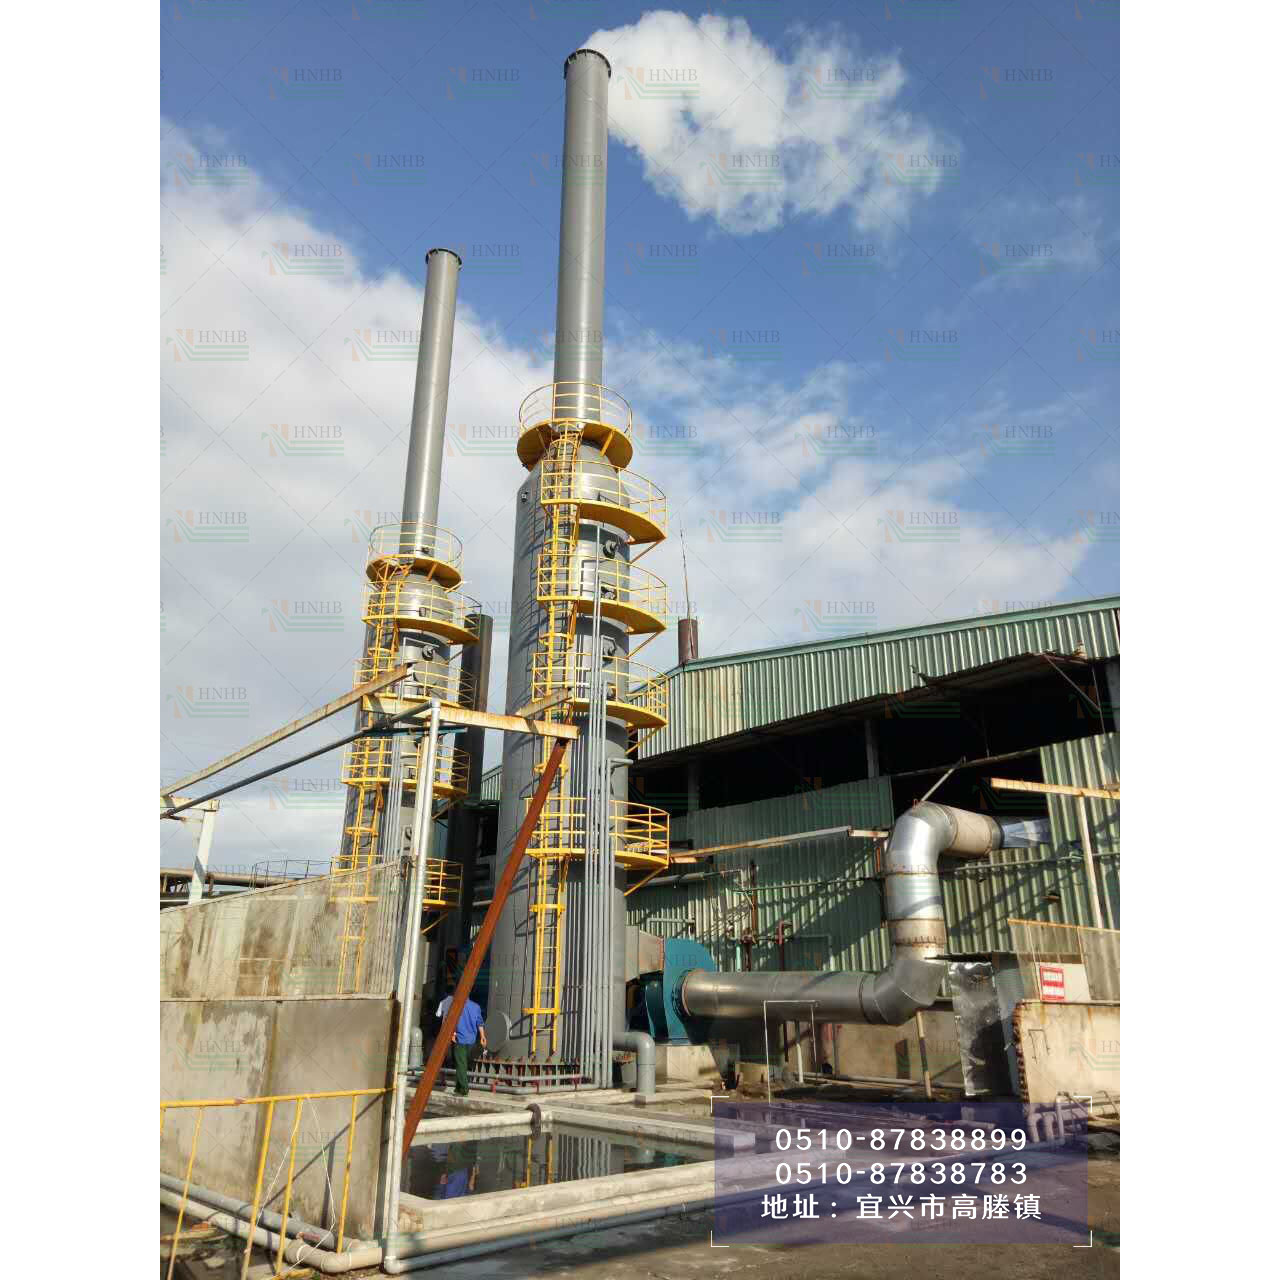 Vietnam-fired organic heat carrier boiler dust removal project